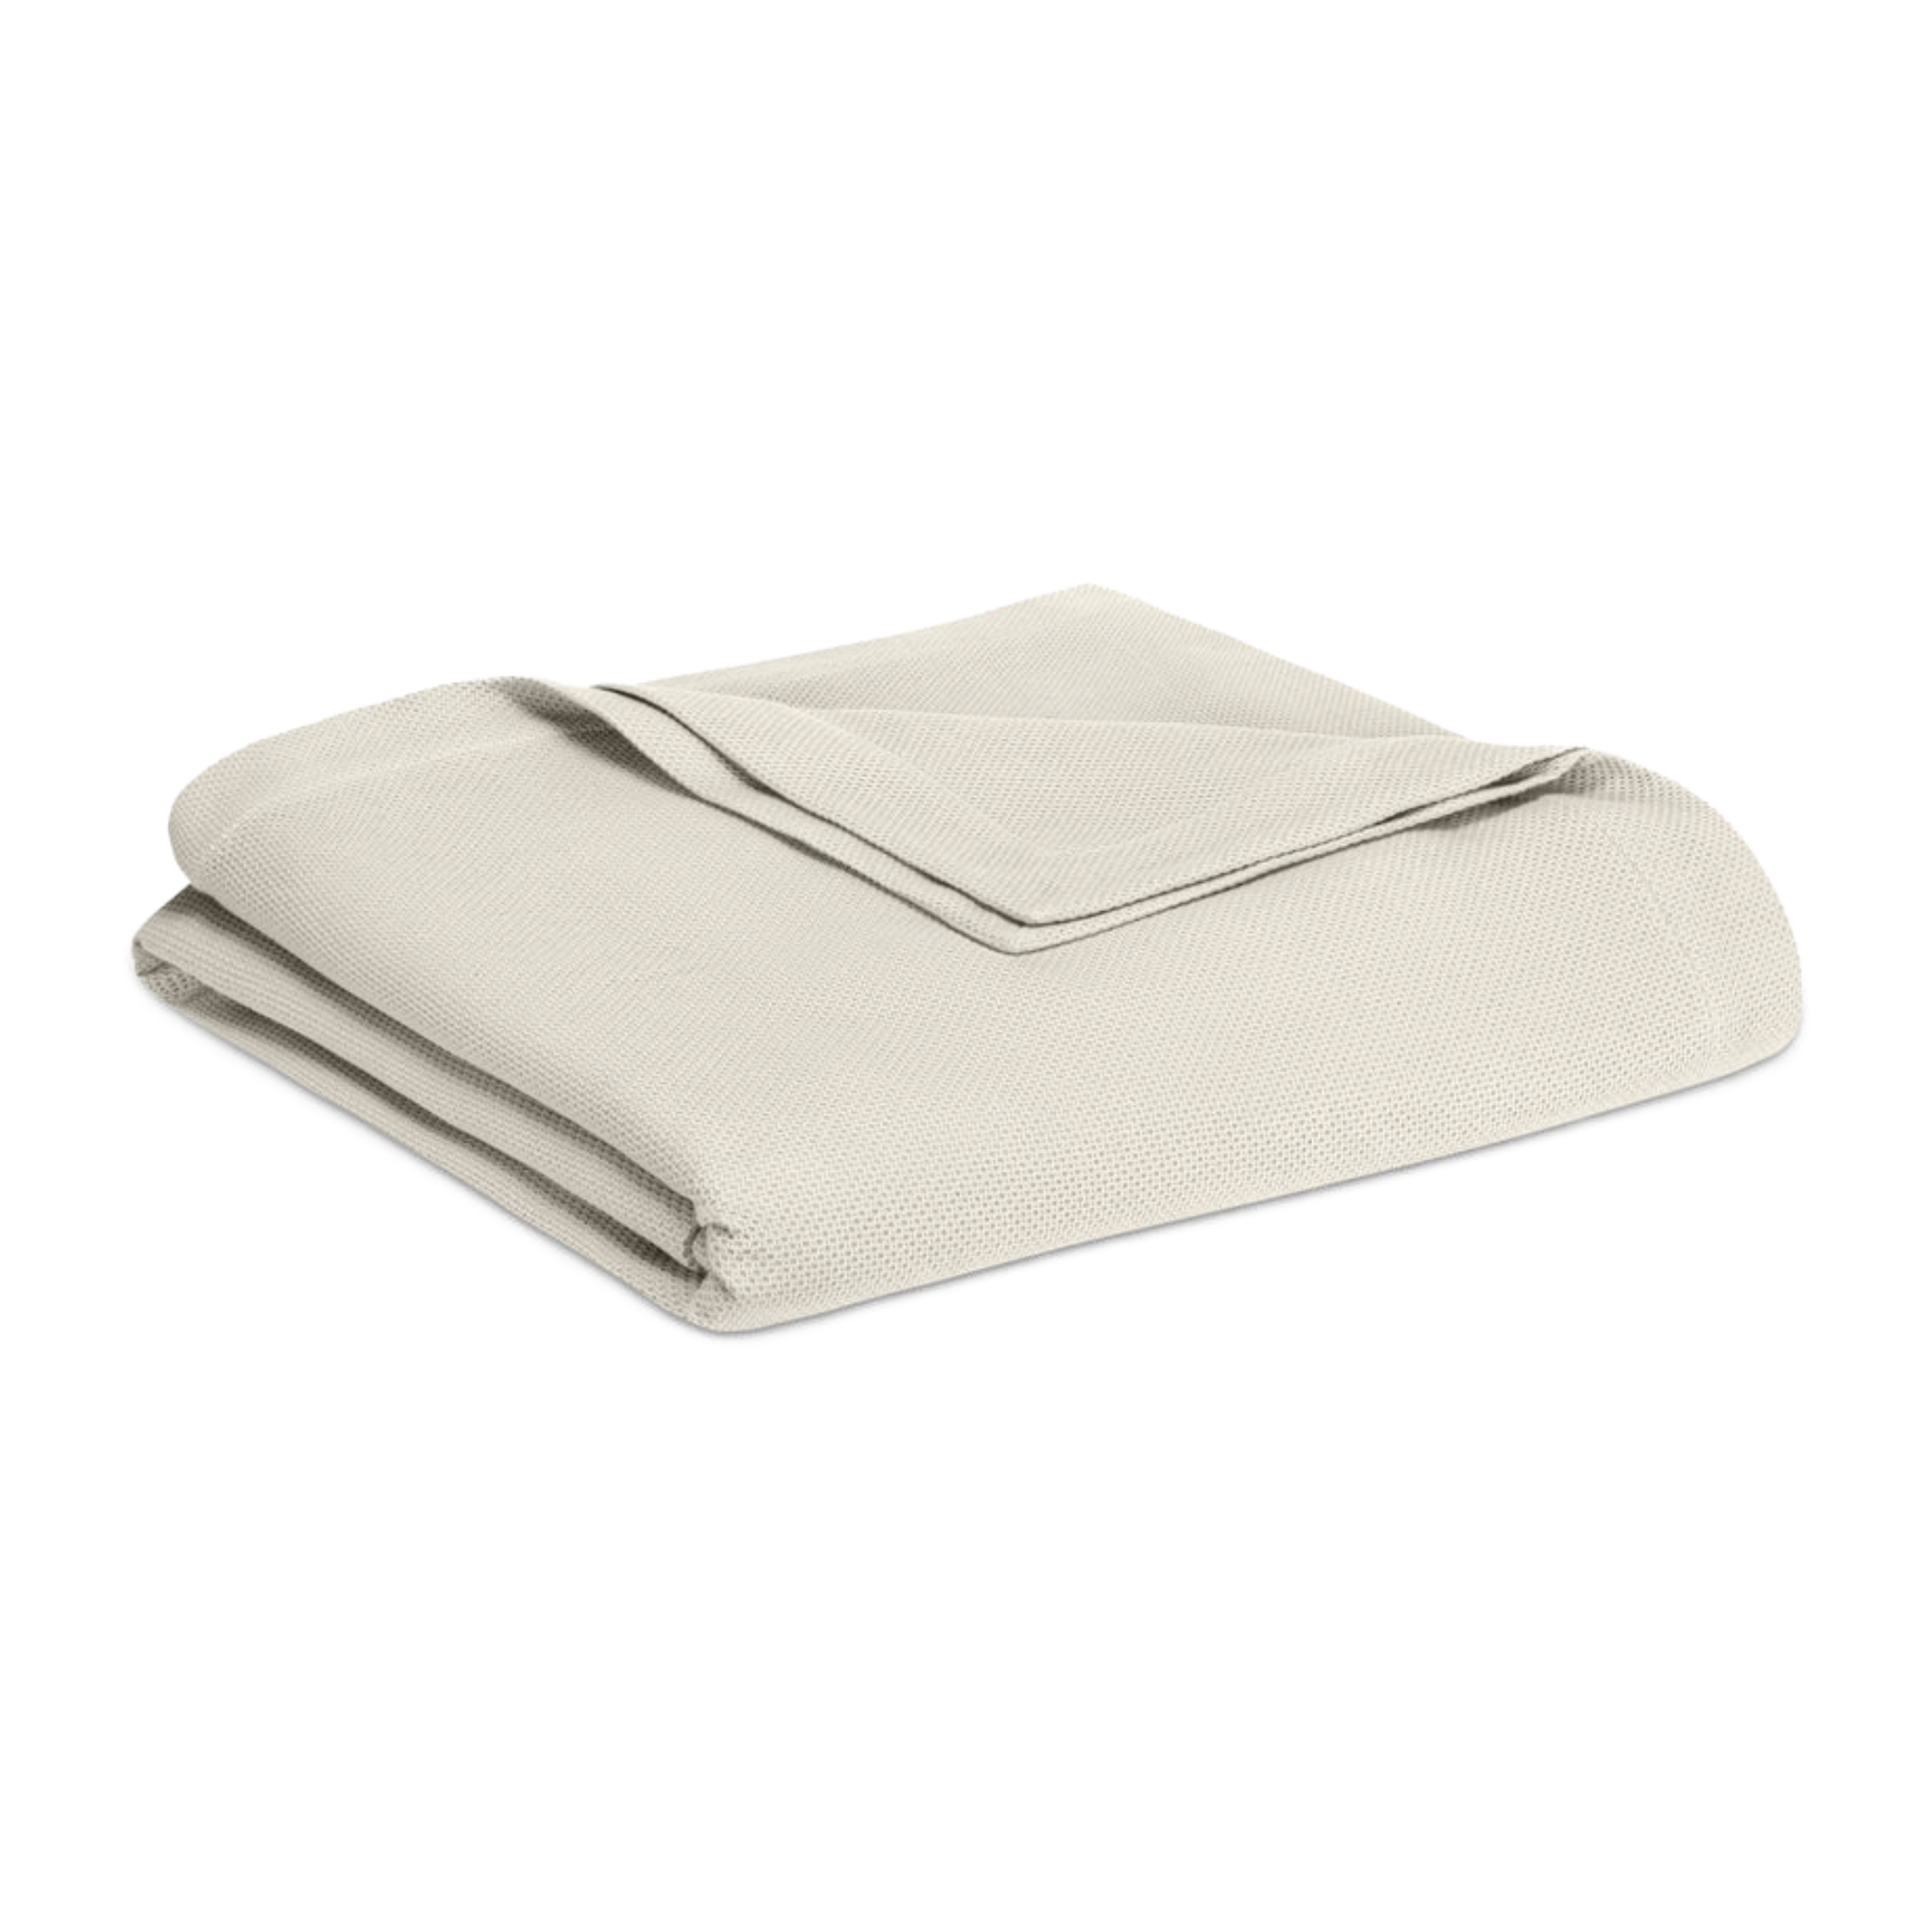 Folded Blanket of Home Treasures Comporta Collection in Ivory Color